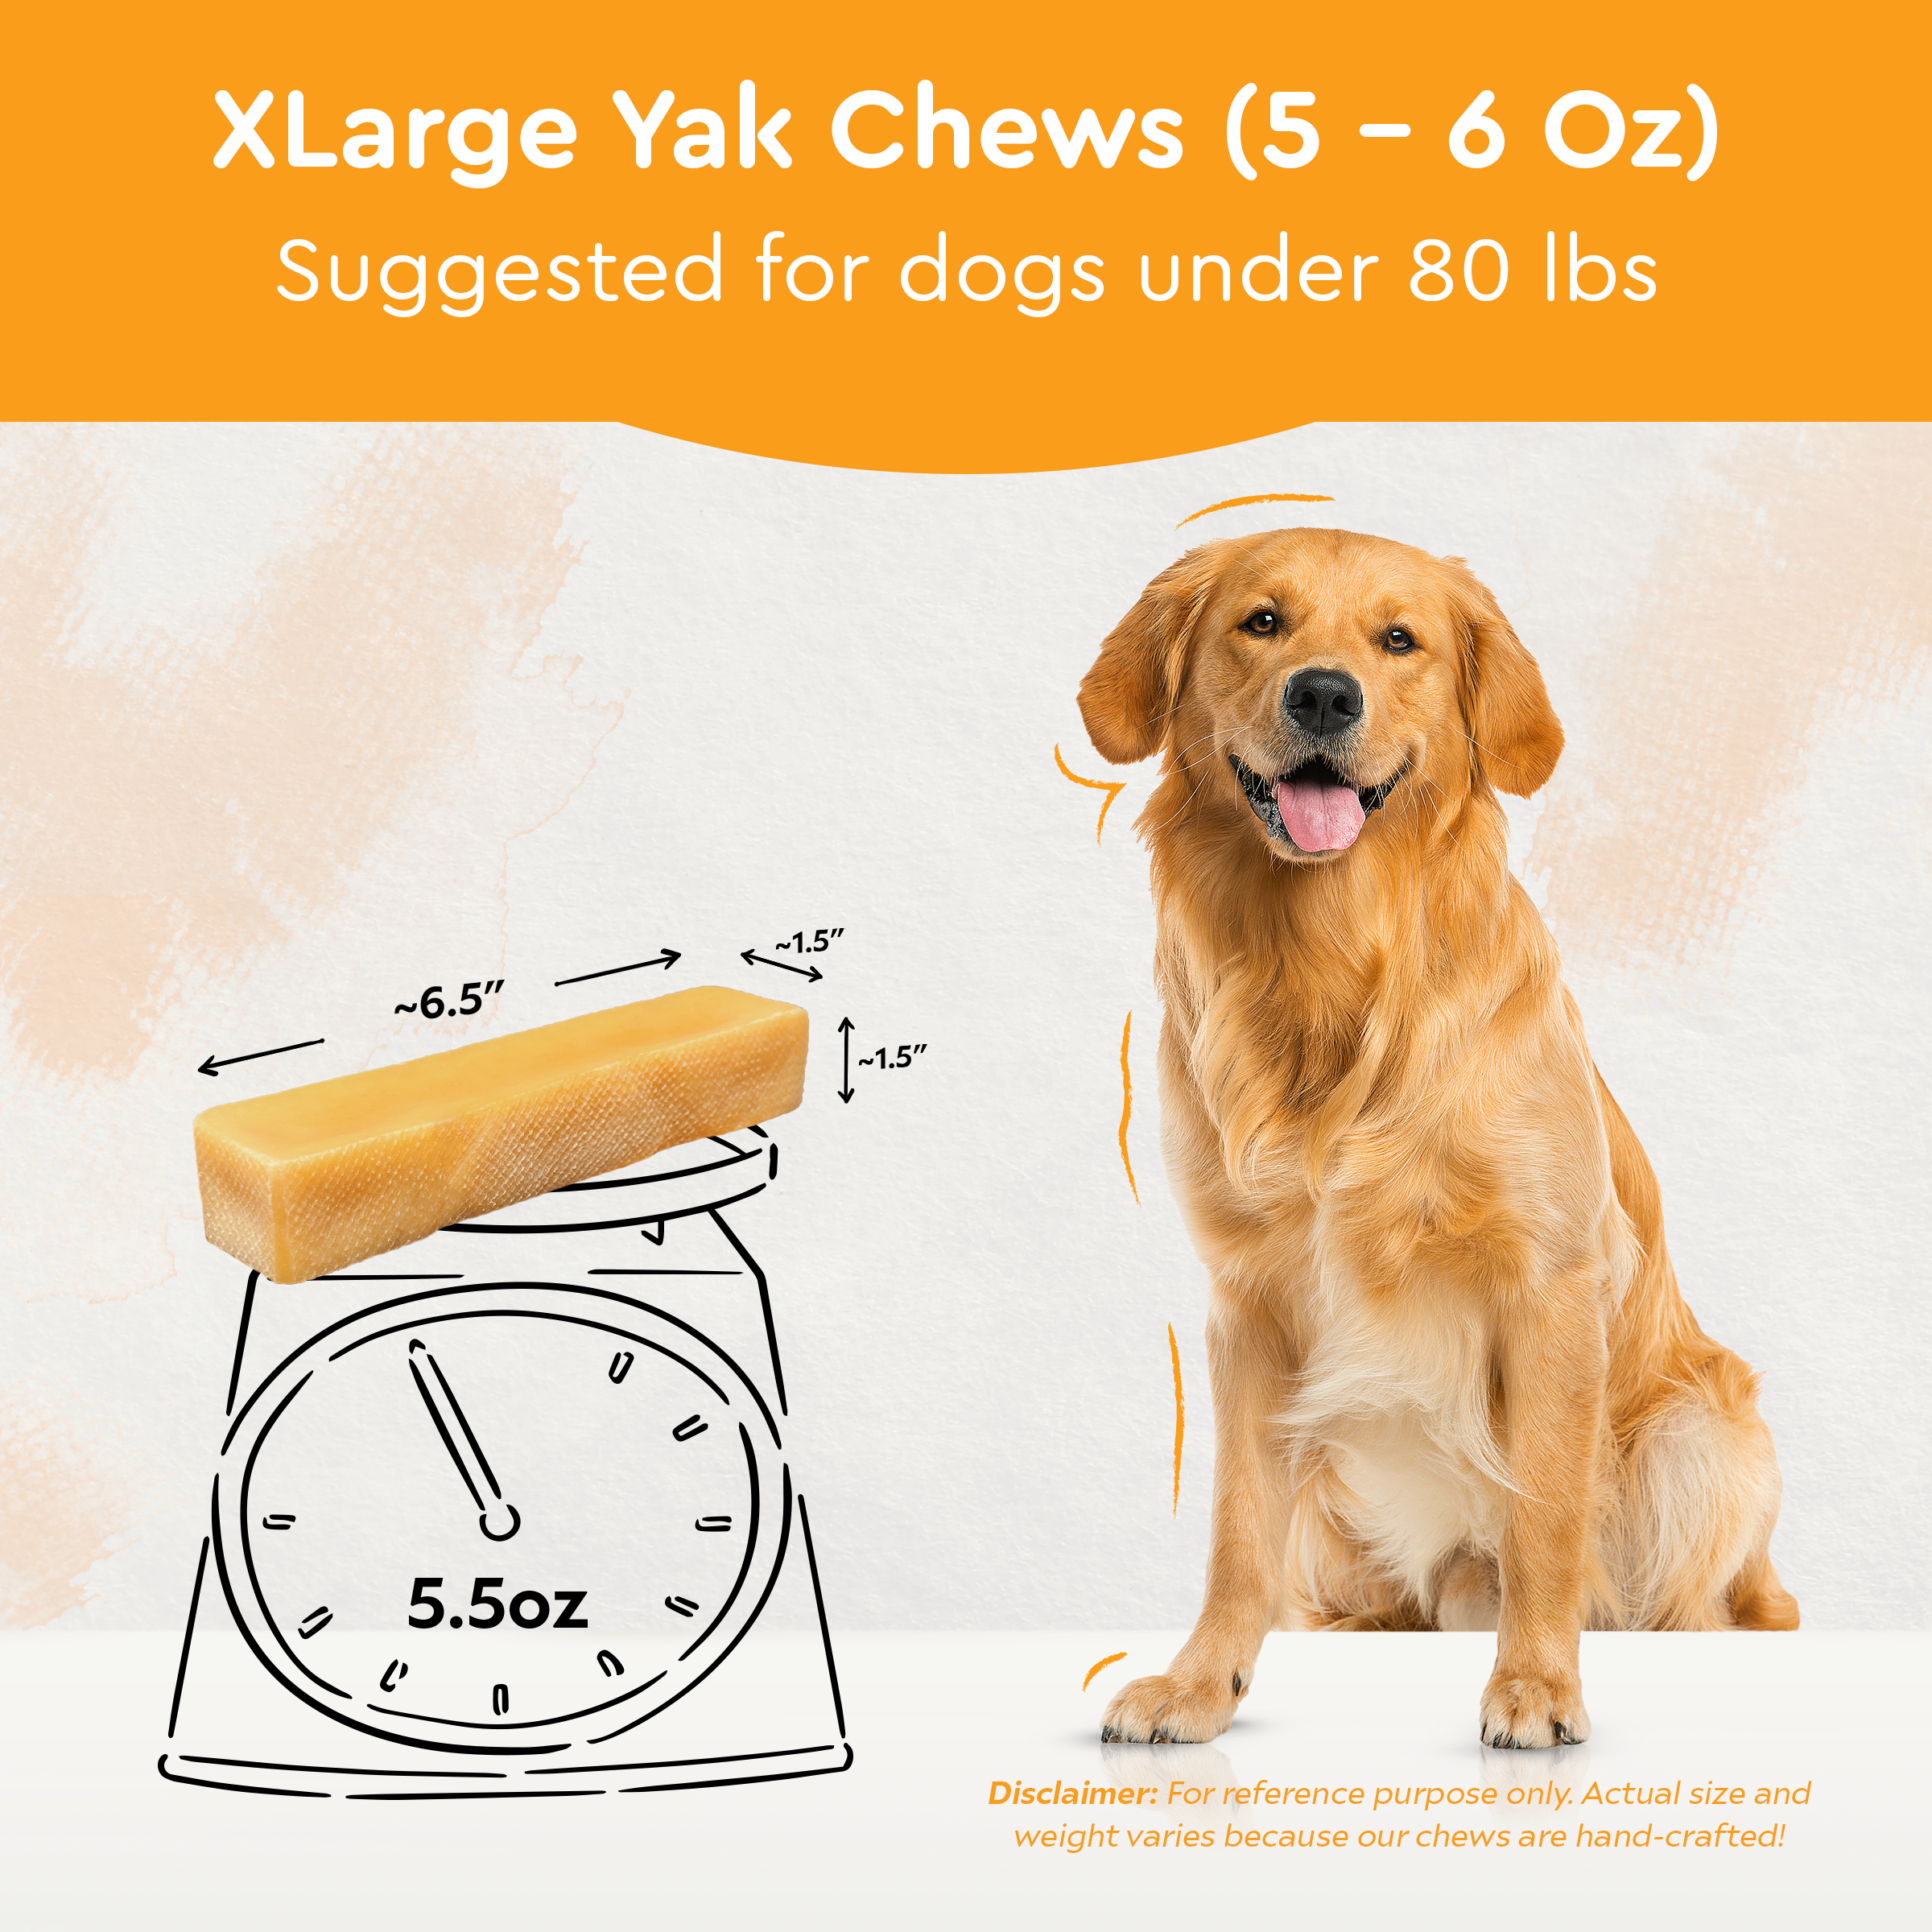 XLarge YAK CHEWS (For Dogs Under 80 Lbs.)